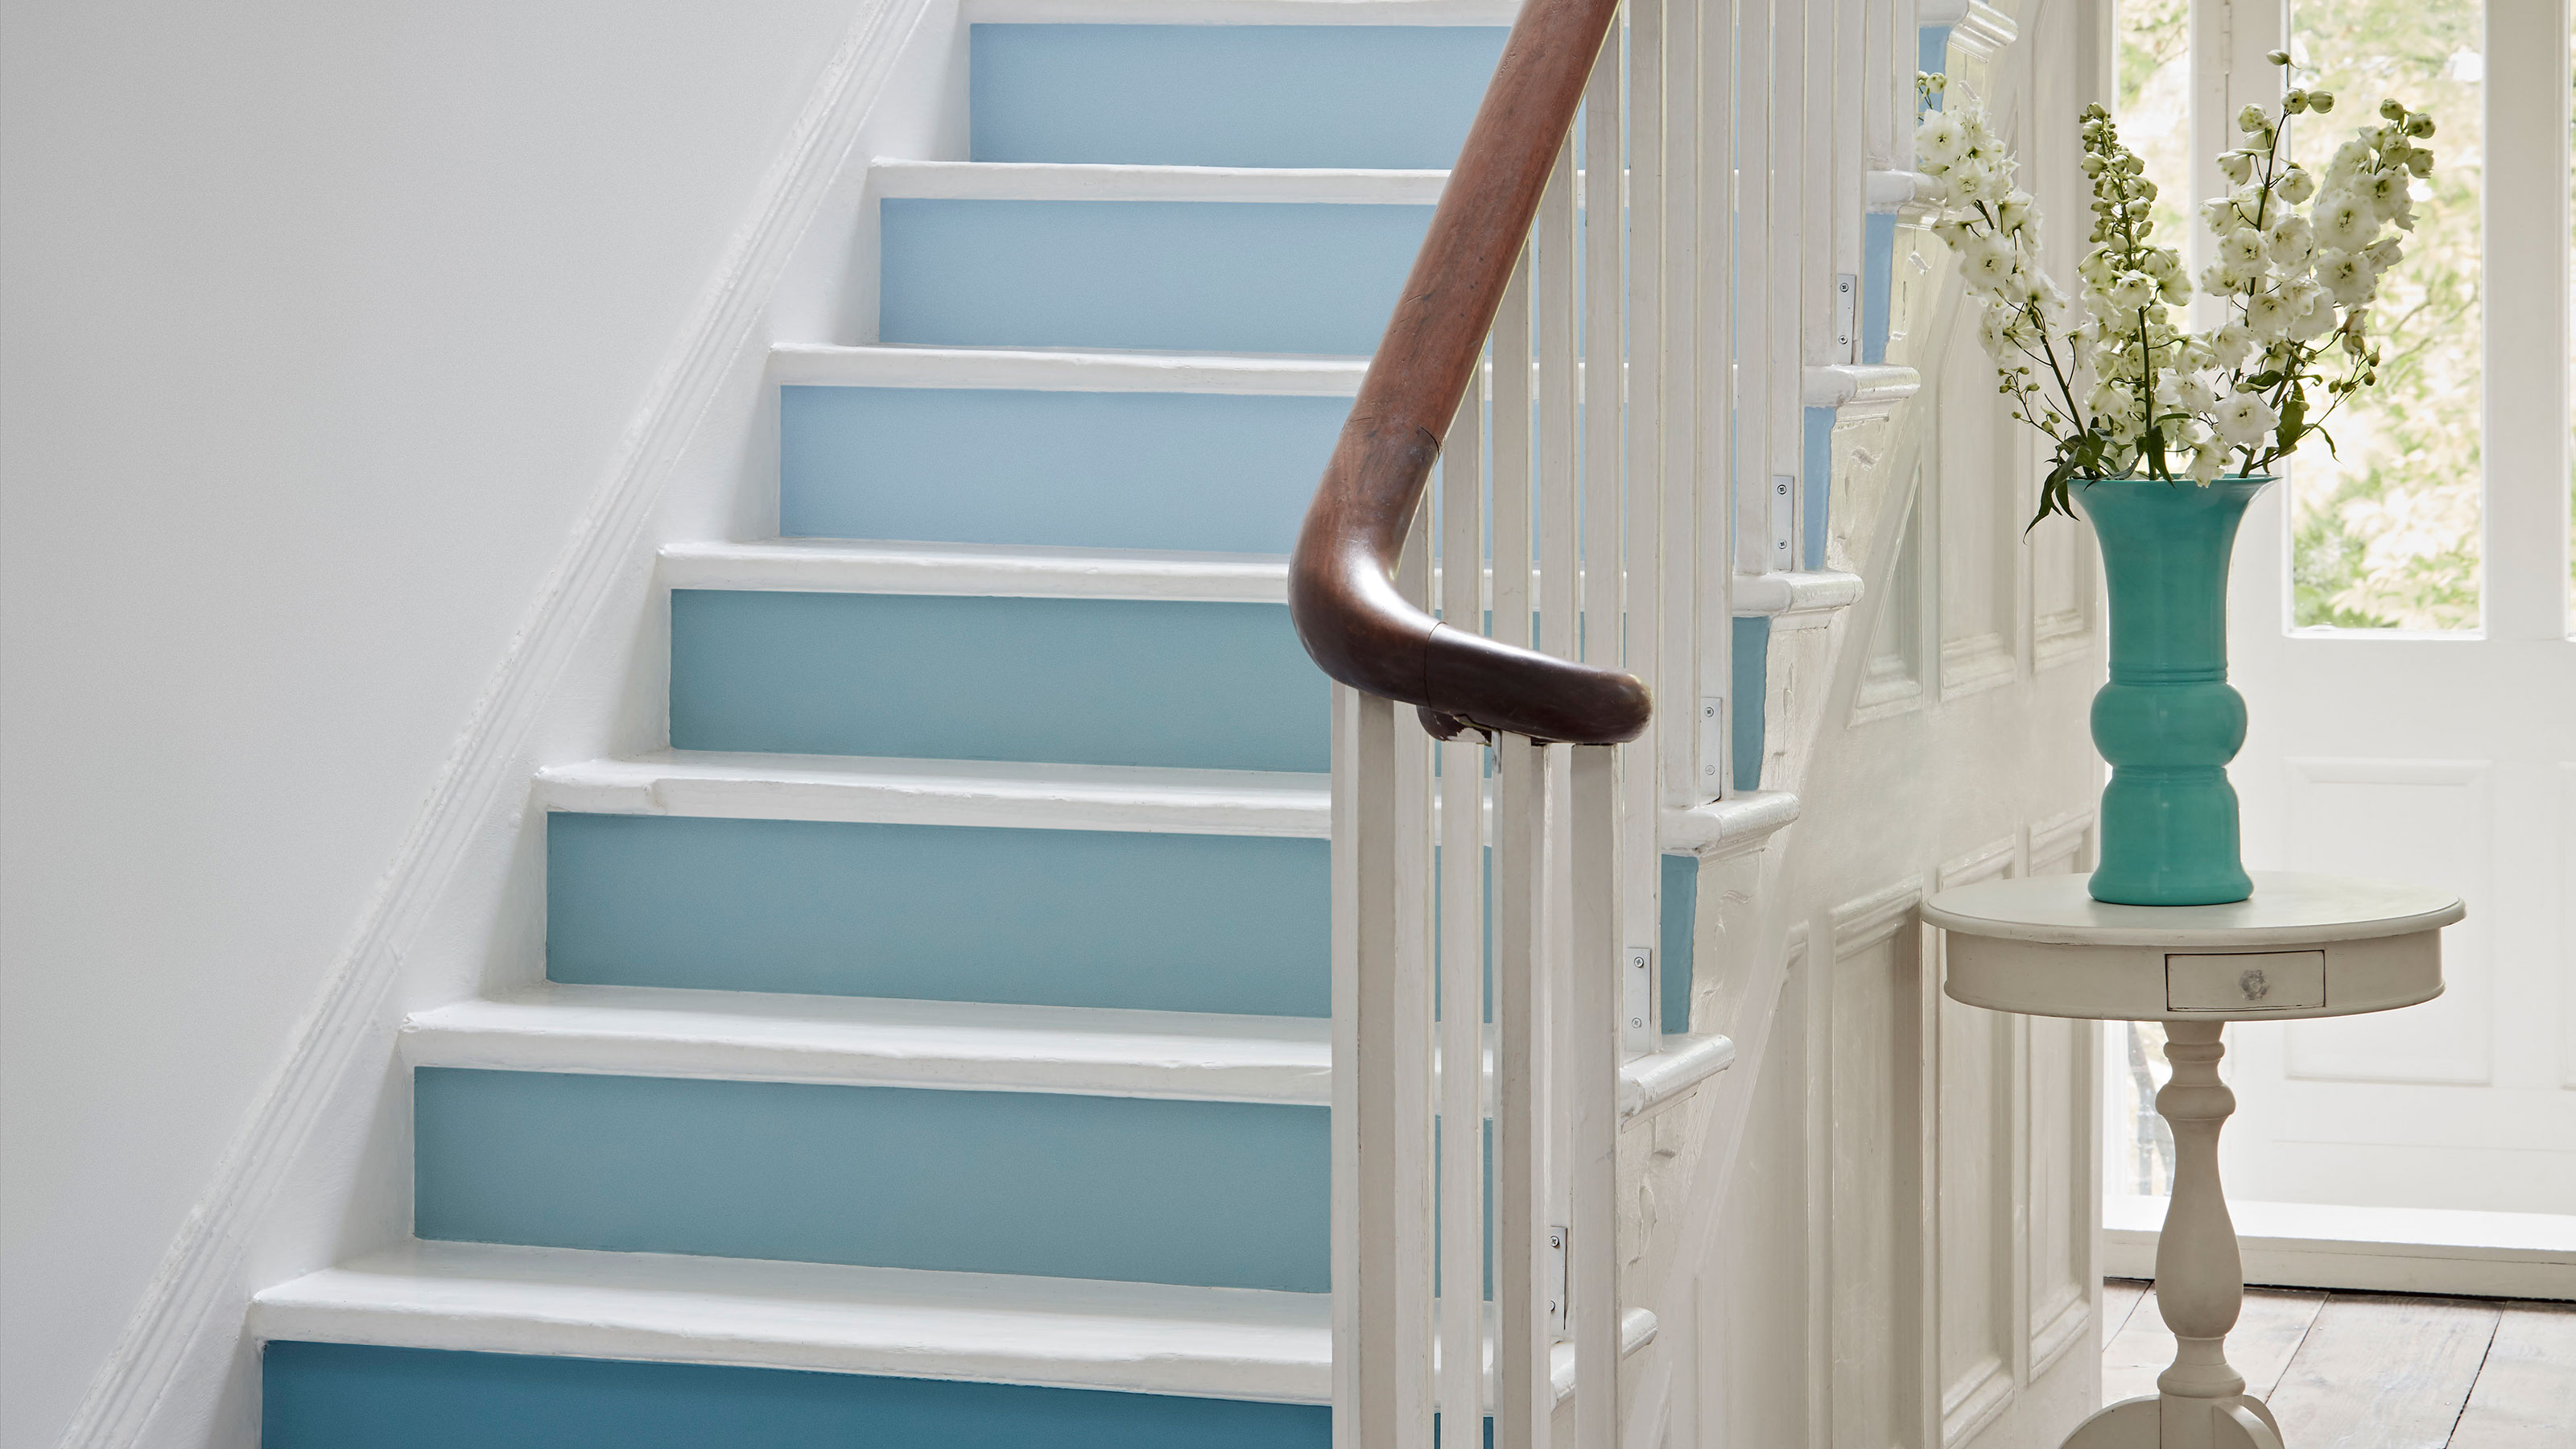 Stair paneling ideas – 10 ways to dress up stair walls in style